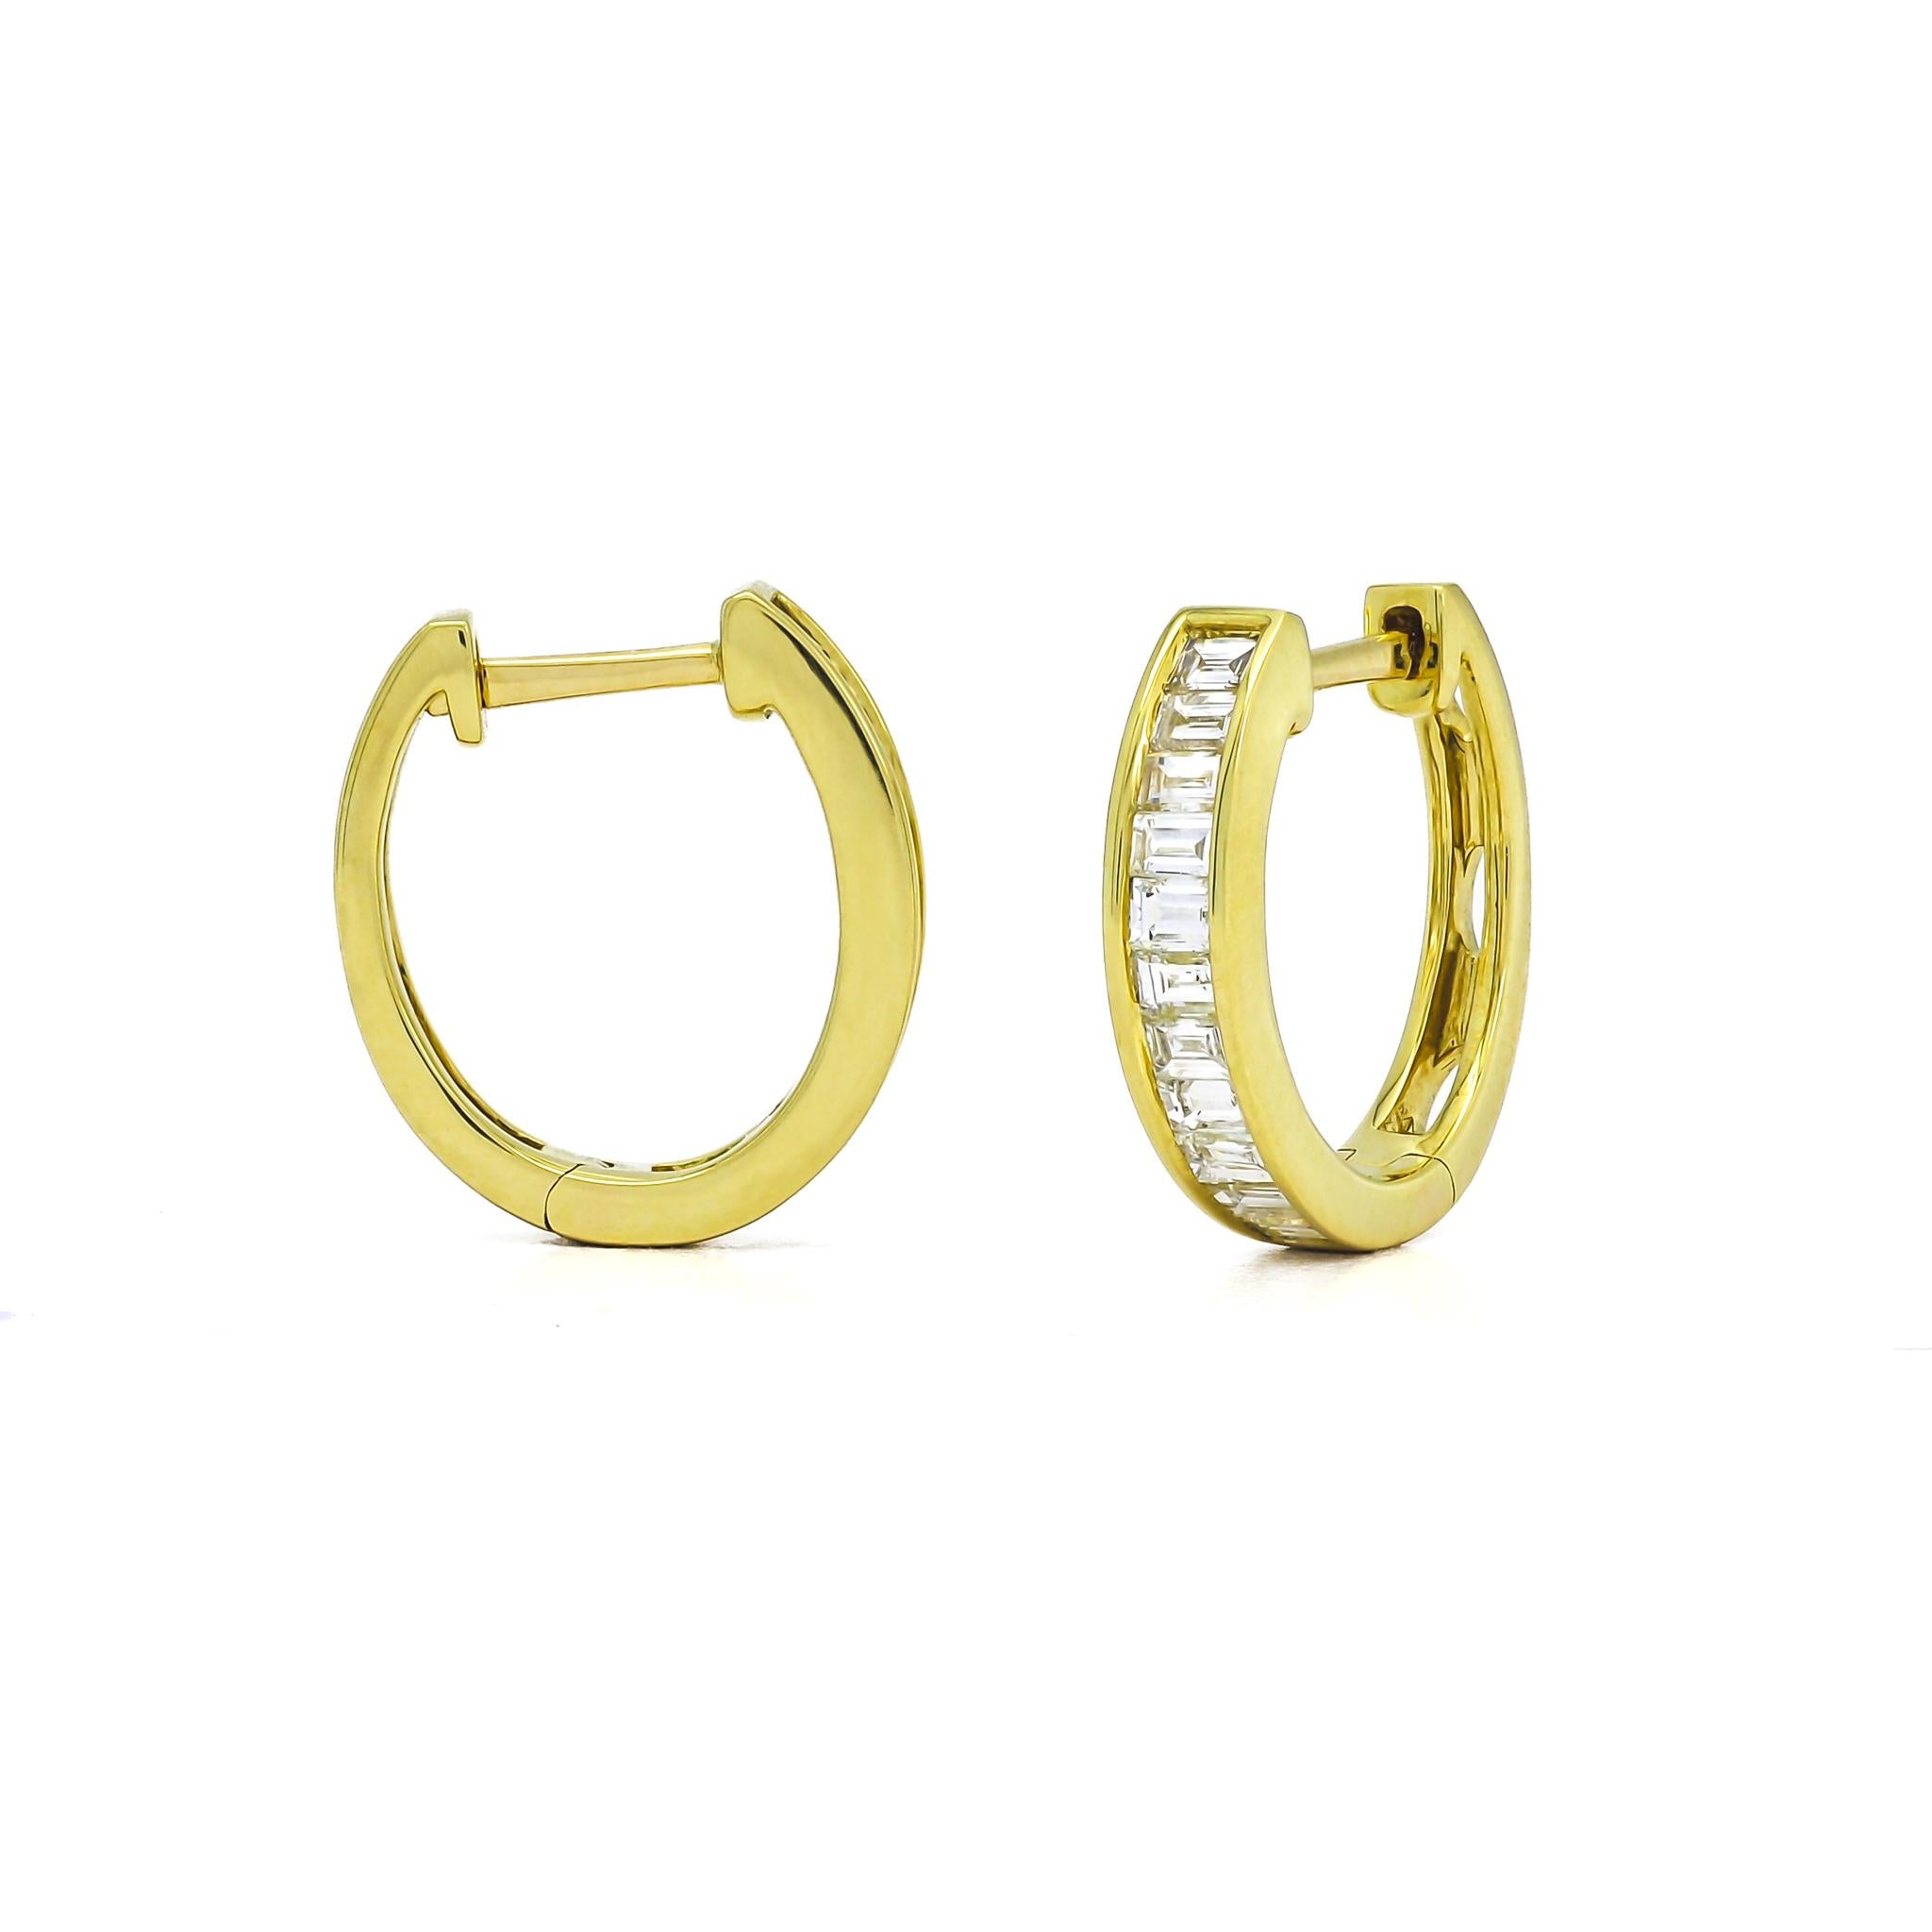 Introducing our 18KT Gold Baguette Diamond Half Hoop Huggies with Bezel detailing—the epitome of minimalistic bIntroducing our 18KT Gold Baguette Diamond Half Hoop Huggies with Bezel detailing—the epitome of minimalistic beauty and refined elegance.